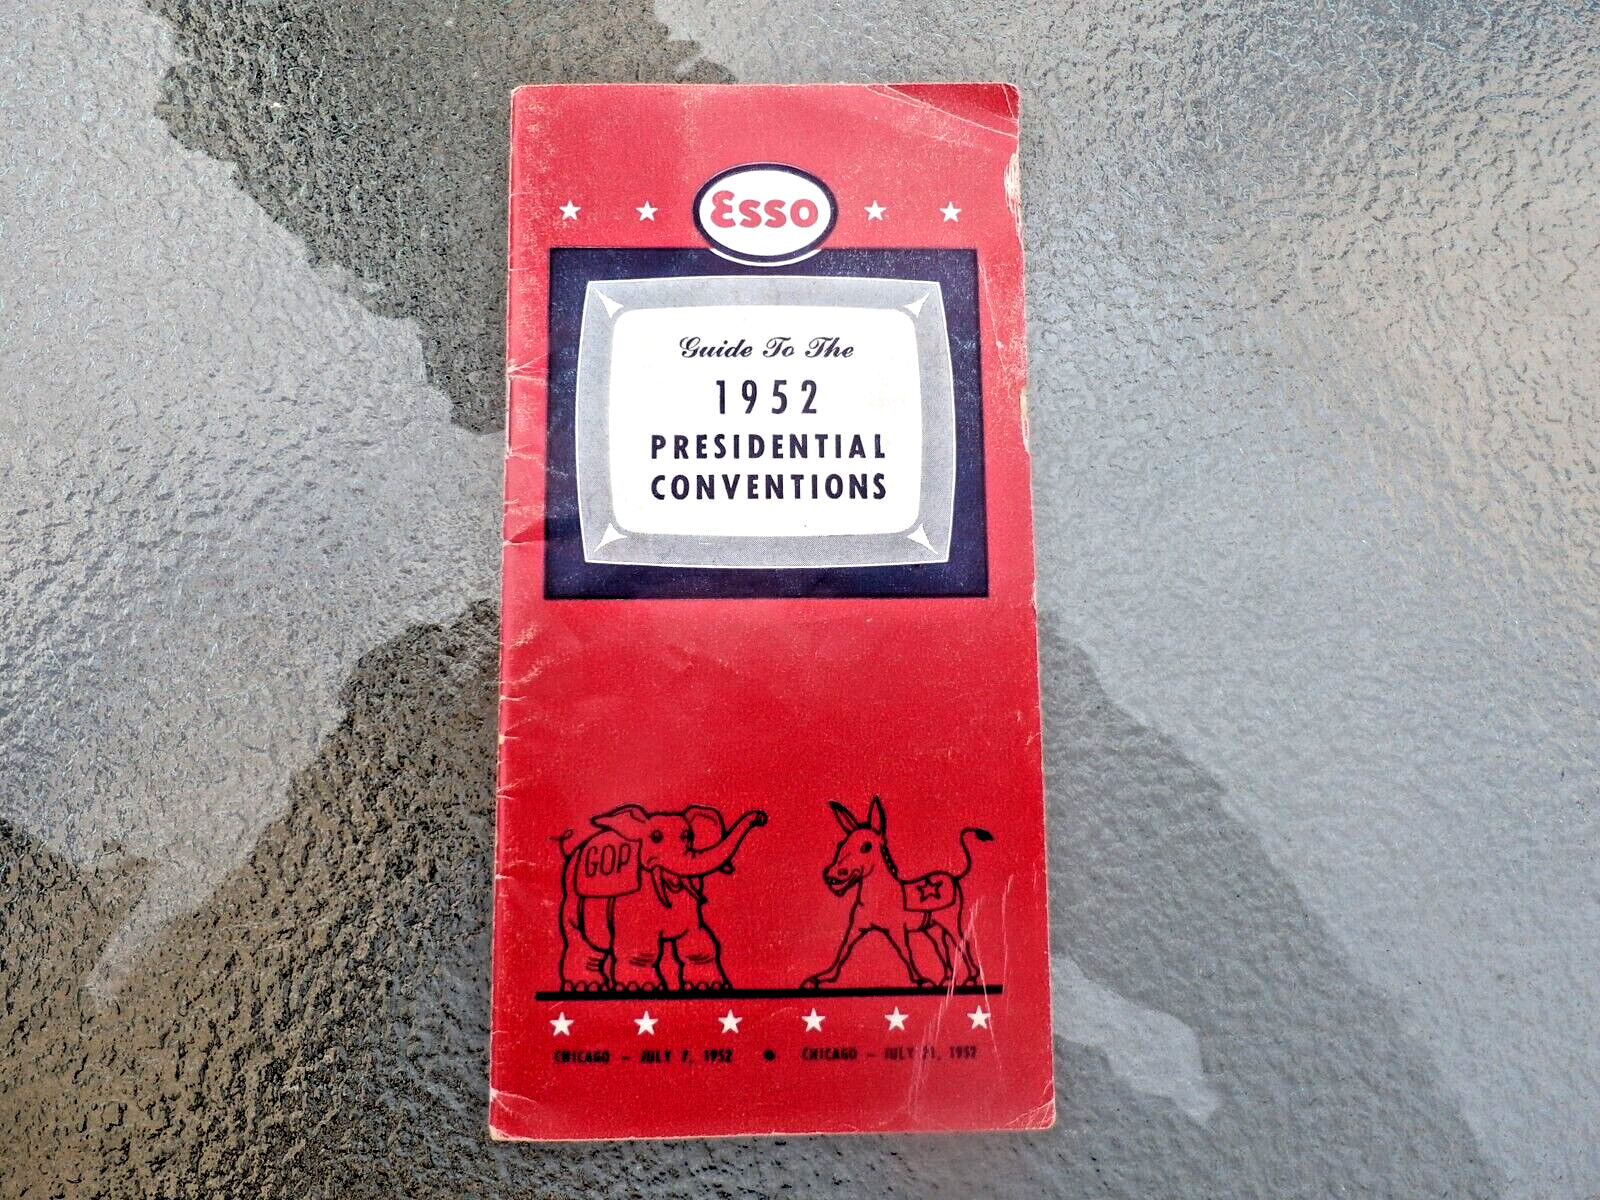 1952 Esso Guide to the Presidential Conventions-Republican & Democrat Convention